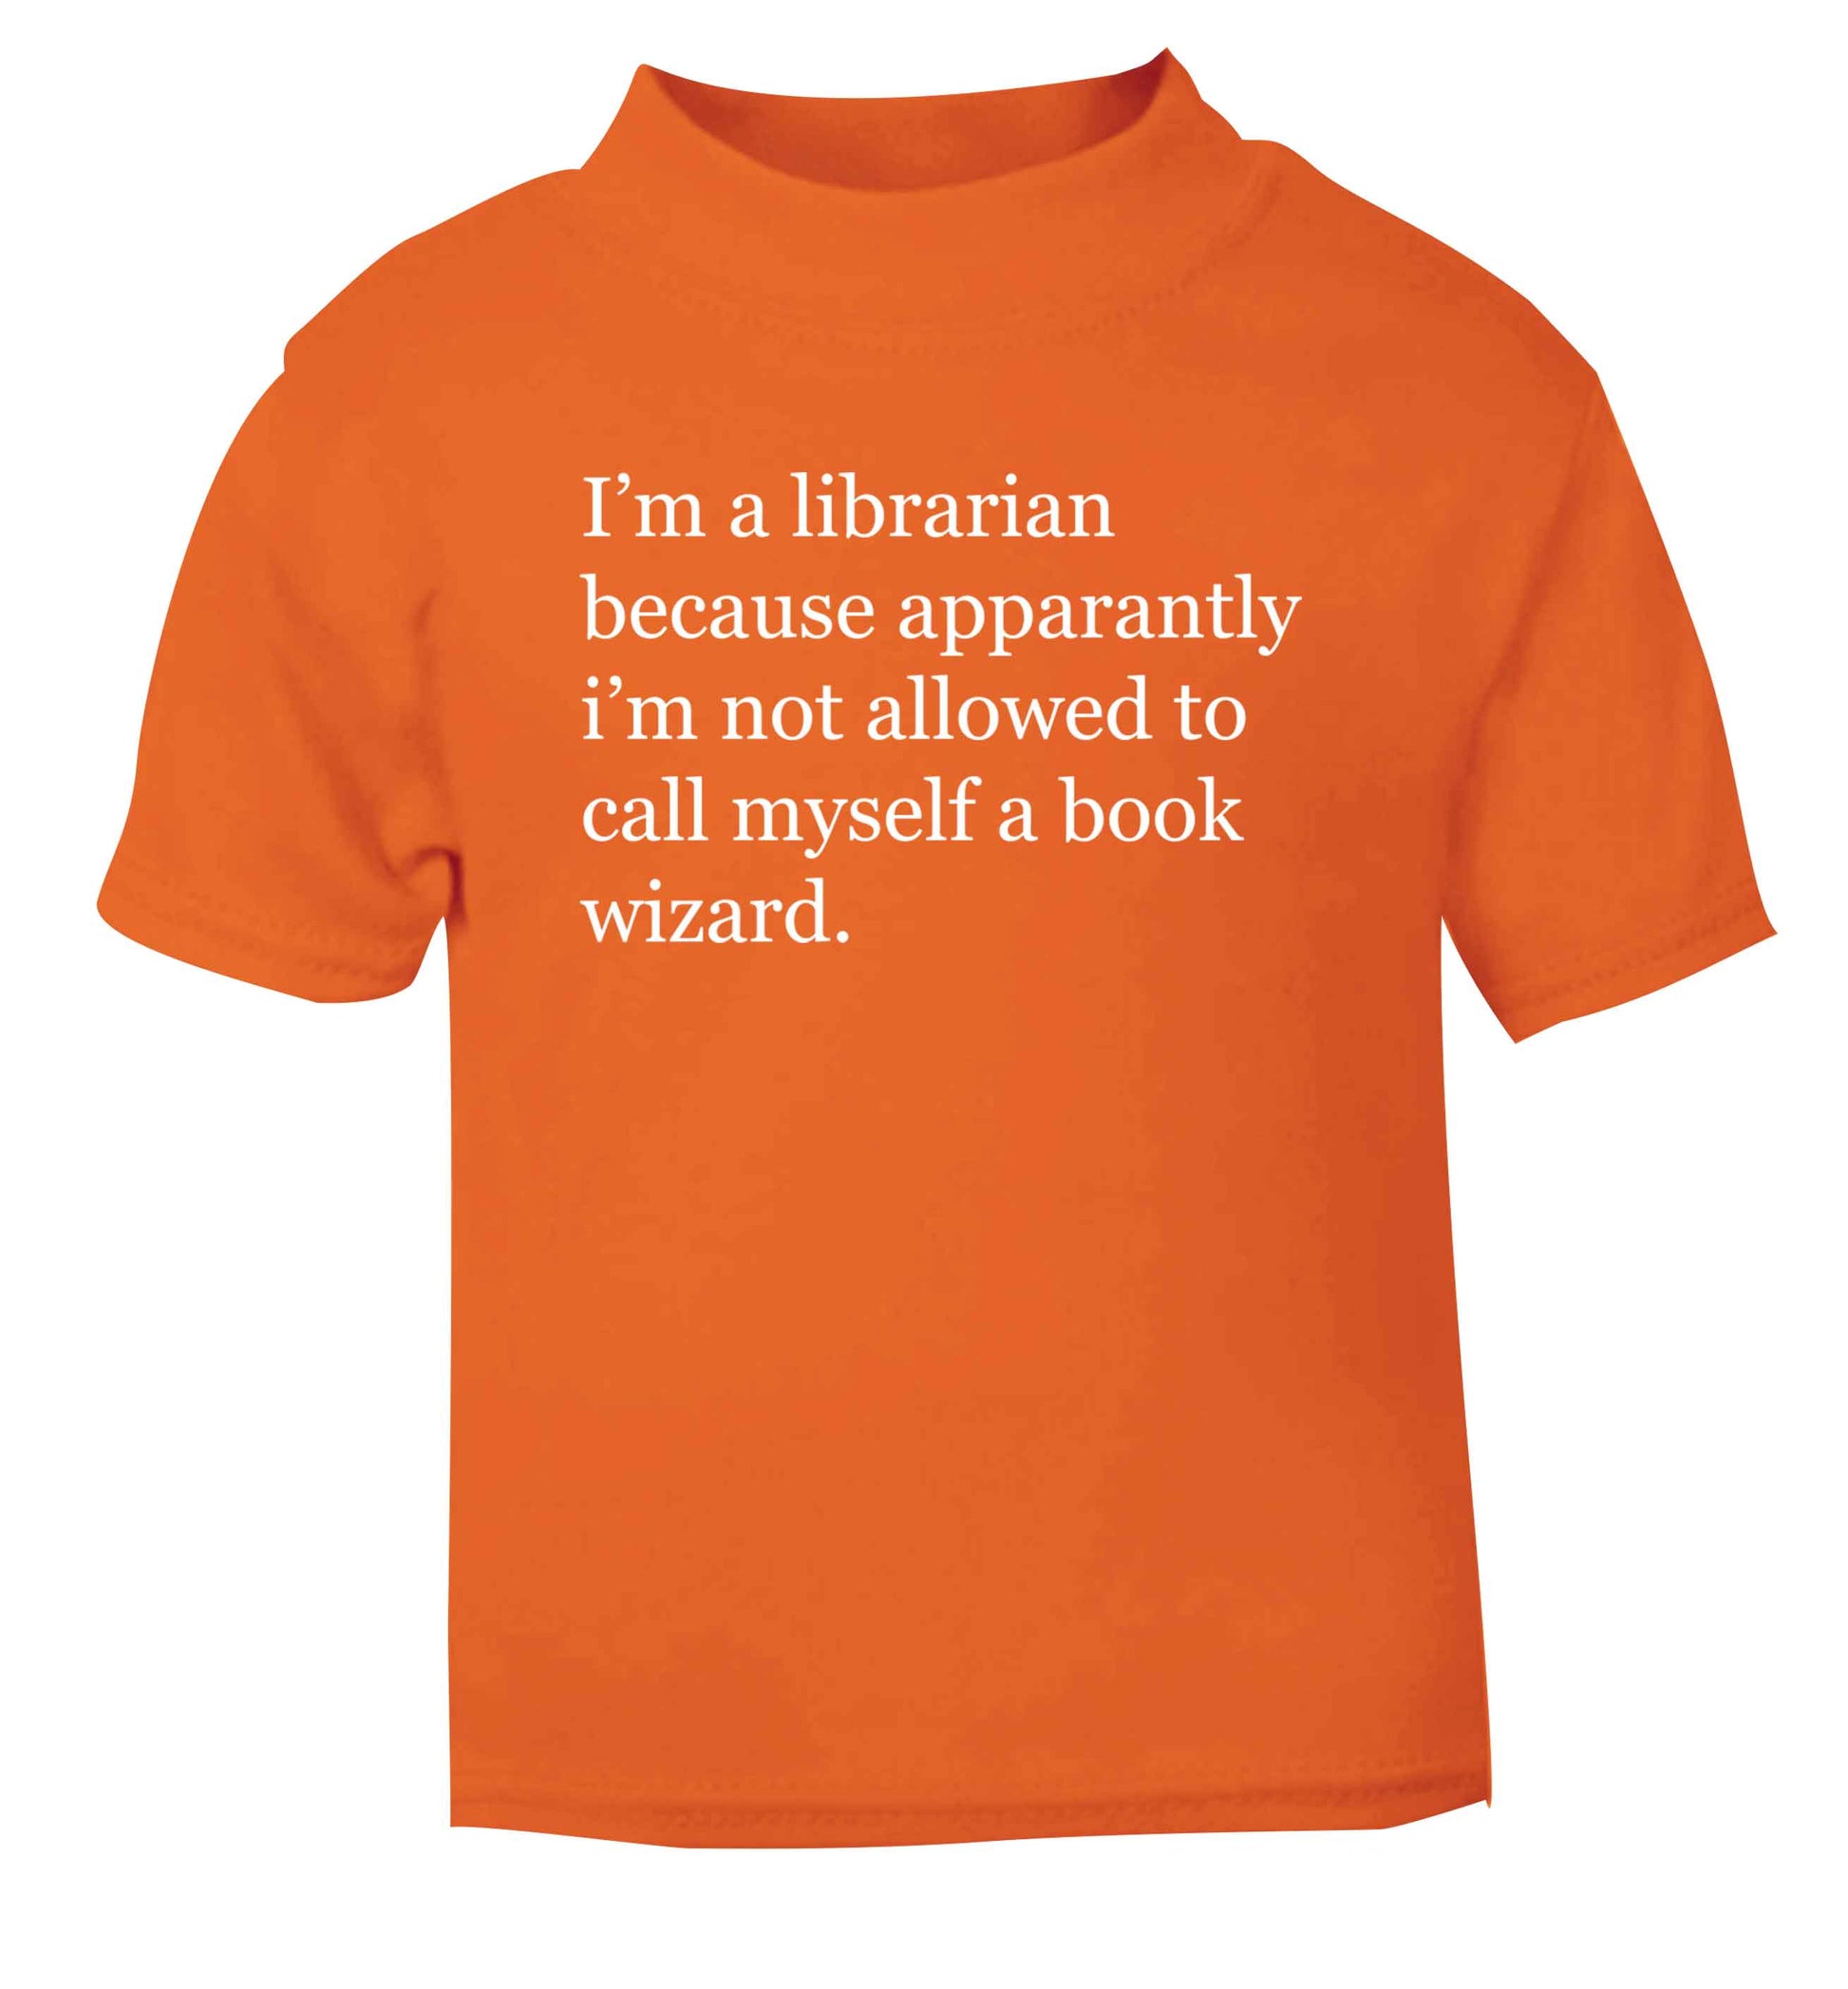 iÕm a librarian because apparantly iÕm not allowed to call myself a book wizard orange Baby Toddler Tshirt 2 Years